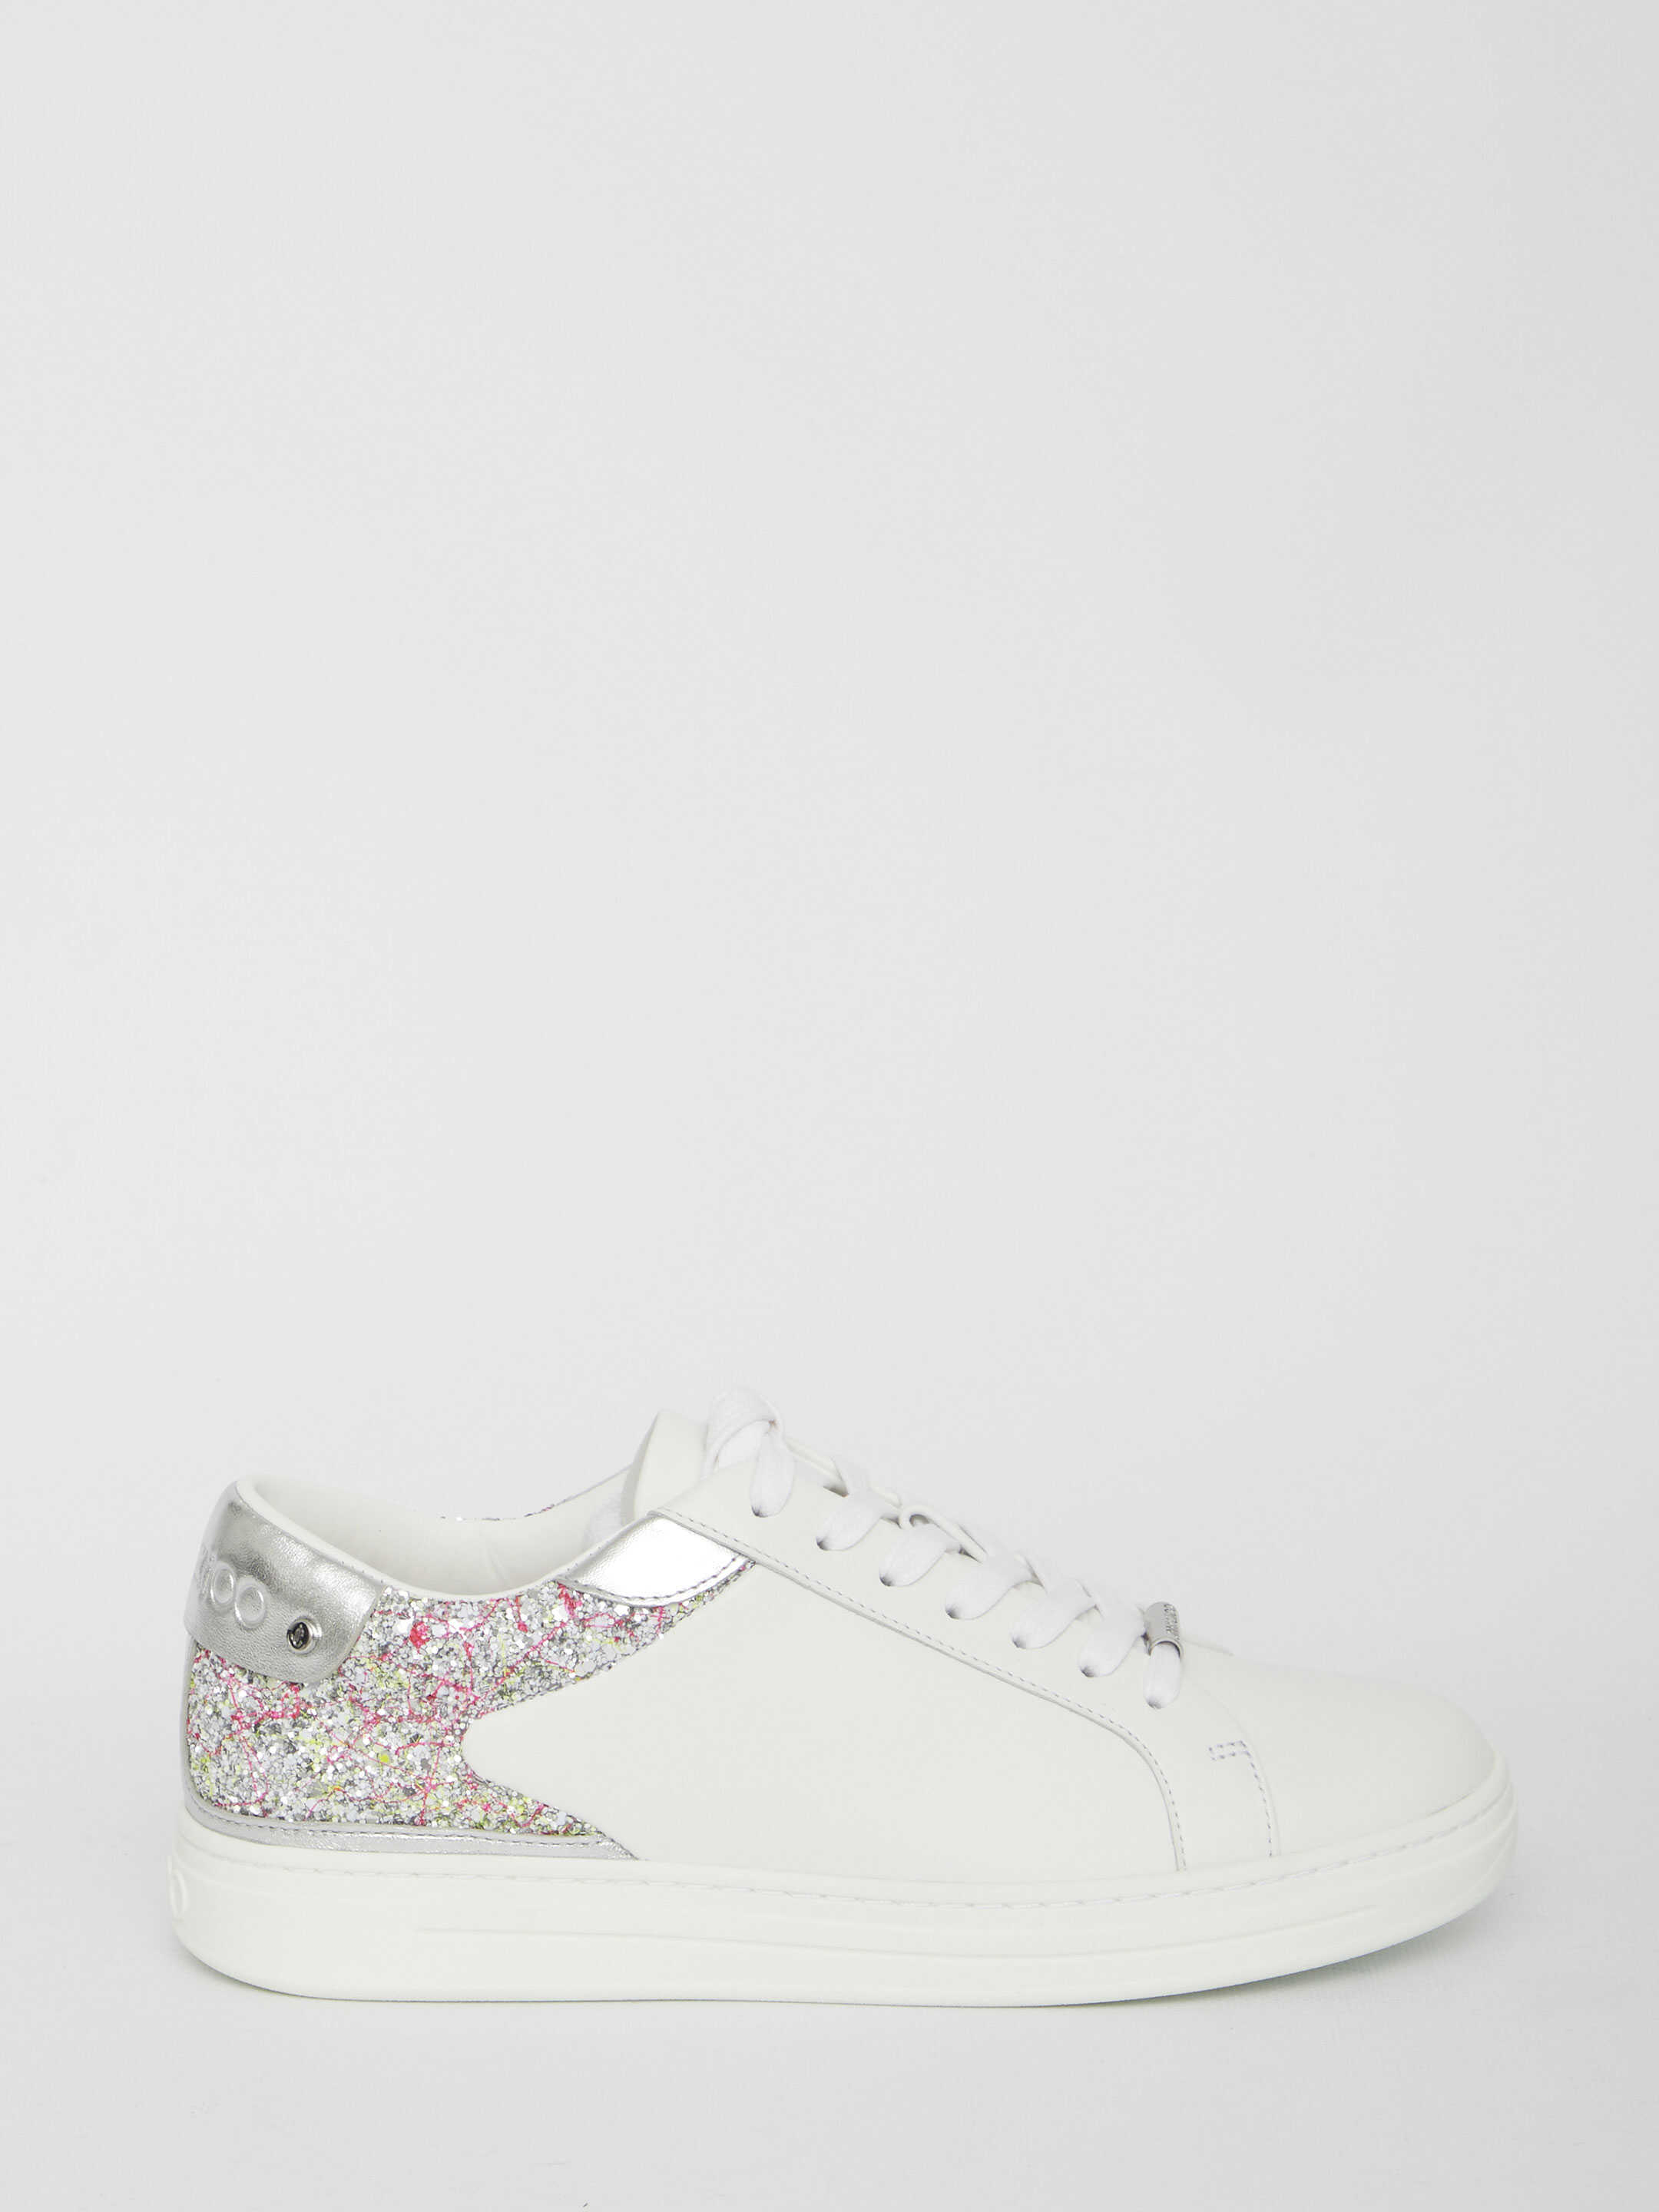 Jimmy Choo Rome/F Sneakers Multicolor image